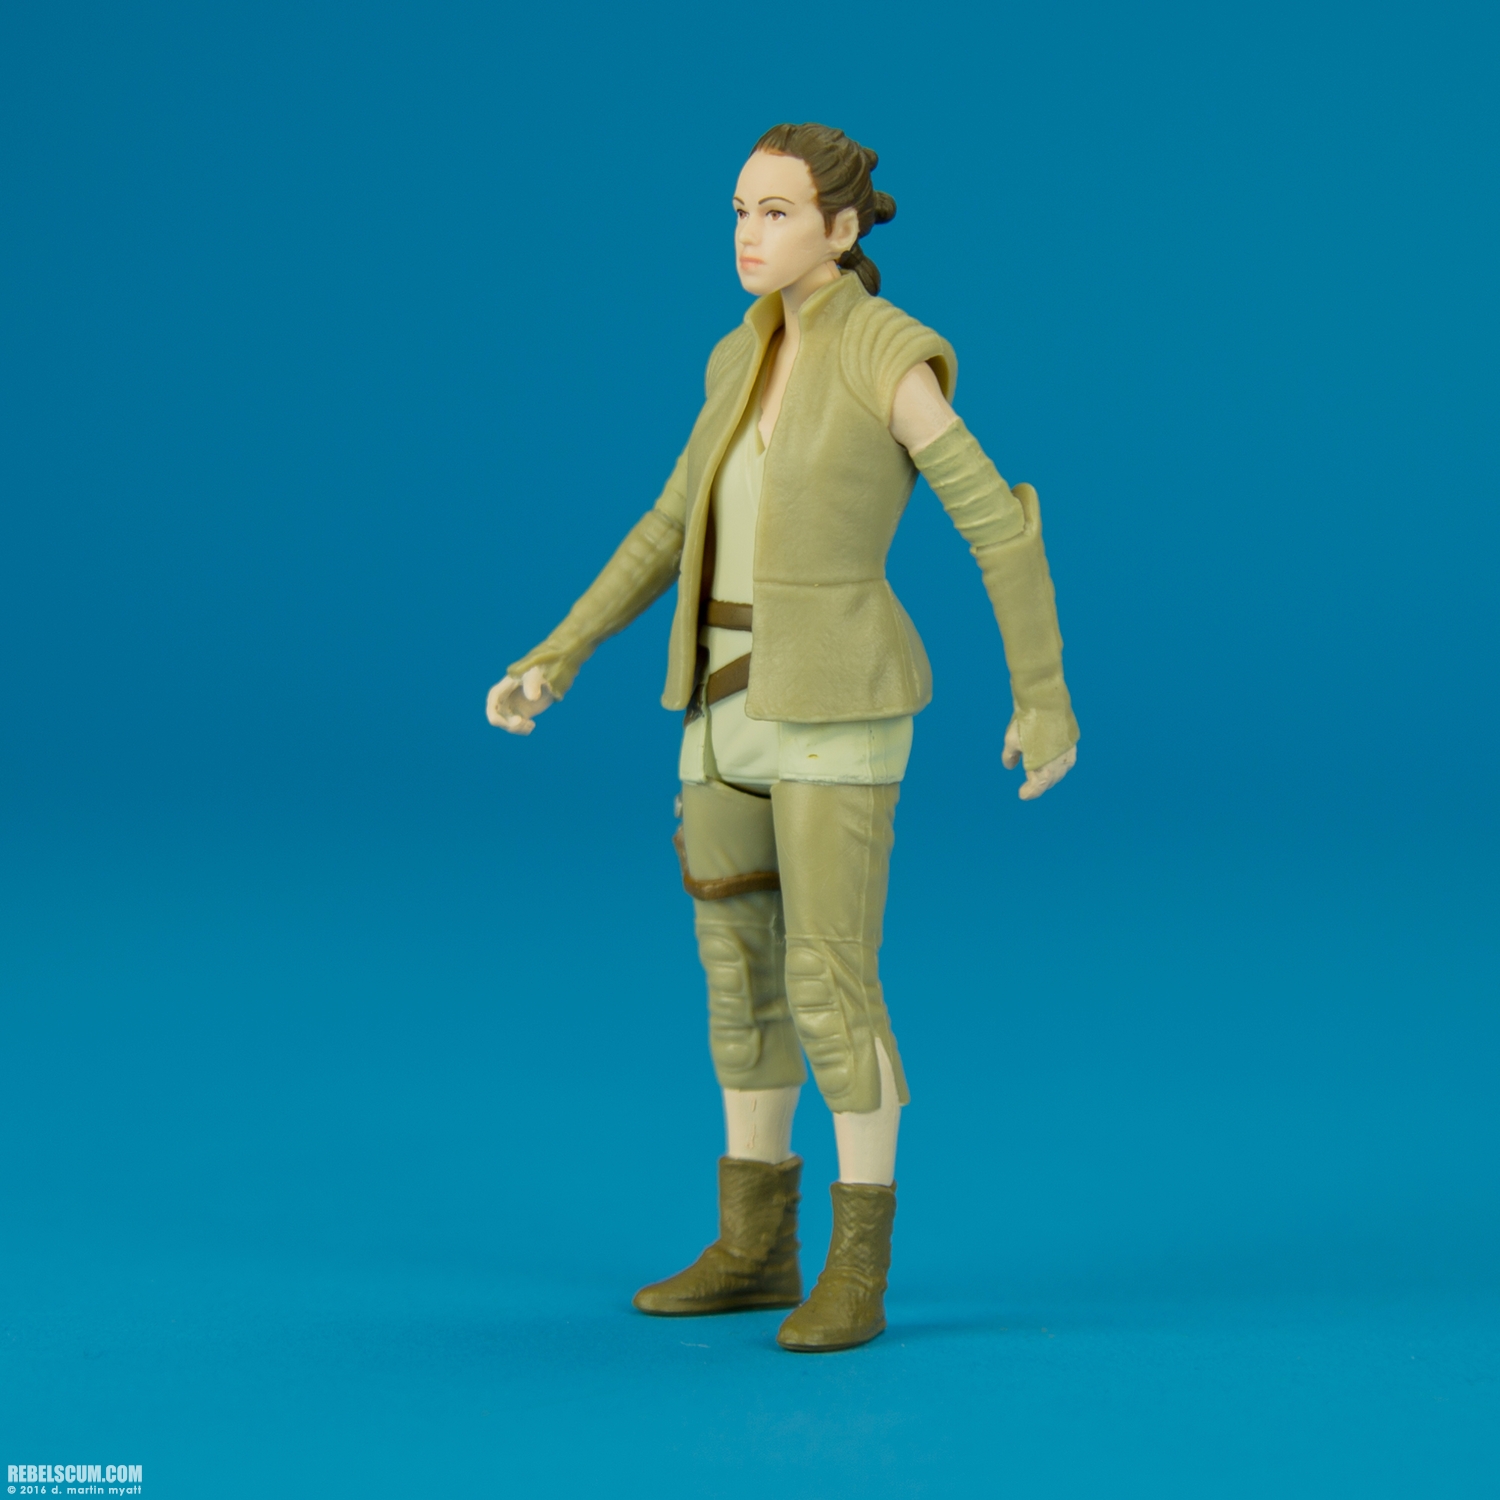 Rey-Resistance-Outfit-The-Force-Awakens-2016-Hasbro-003.jpg